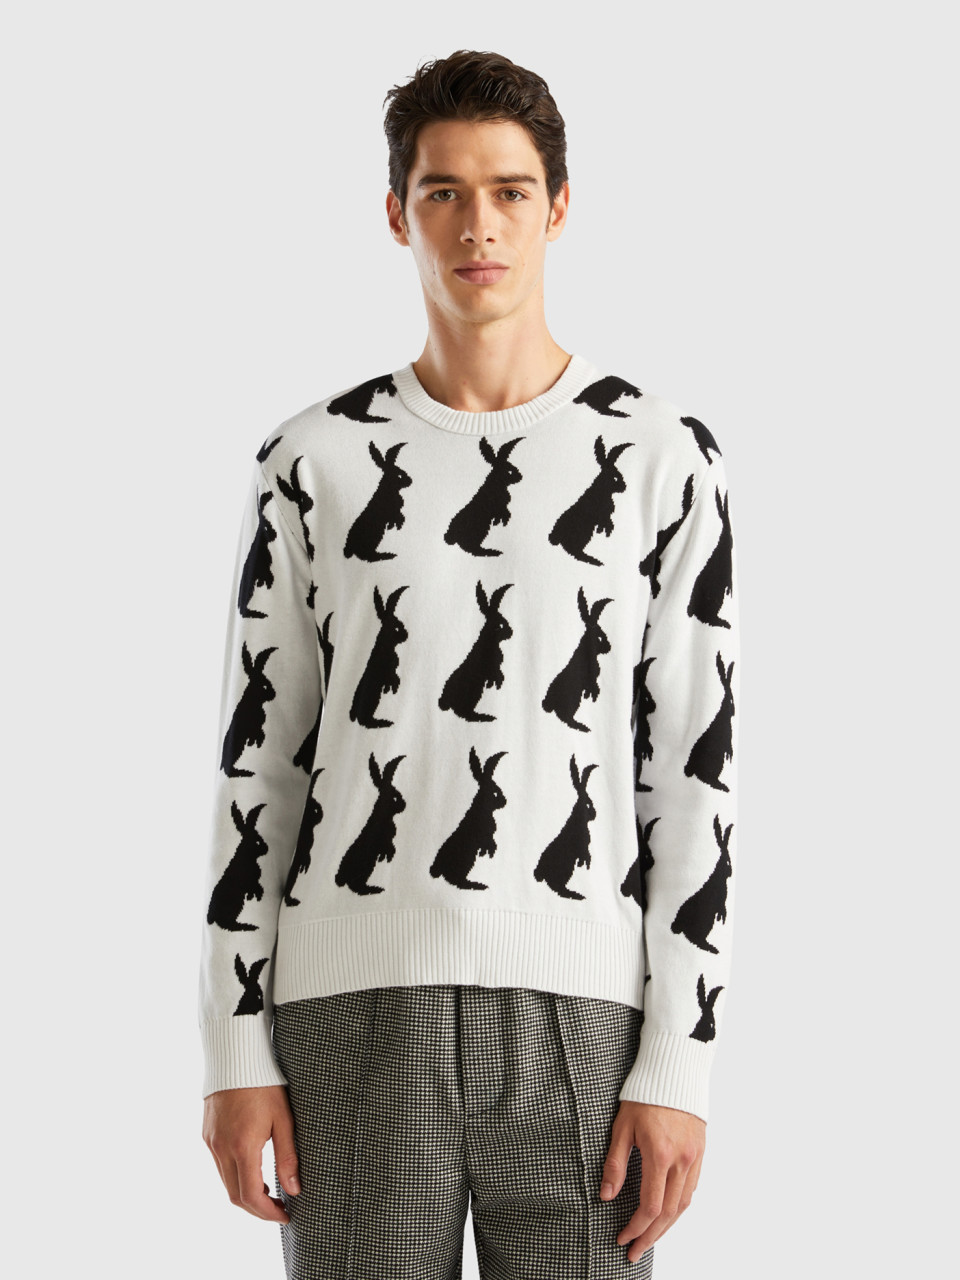 Benetton, Sweater With Bunny Pattern, White, Men